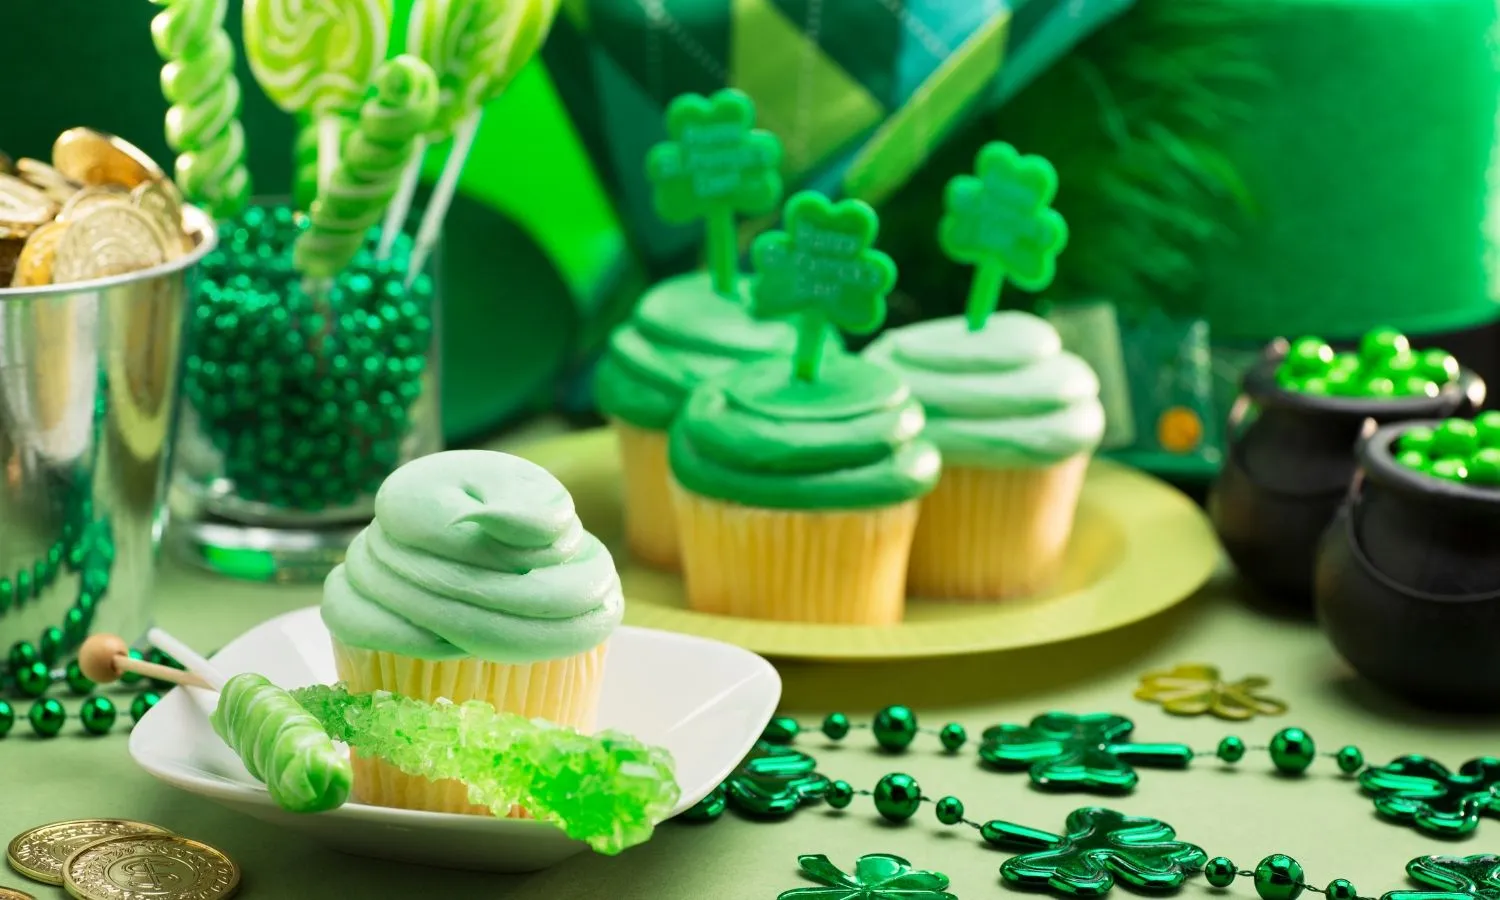 Get Your herbage On CelebrateSt. Patrick's Day in Cobb County!